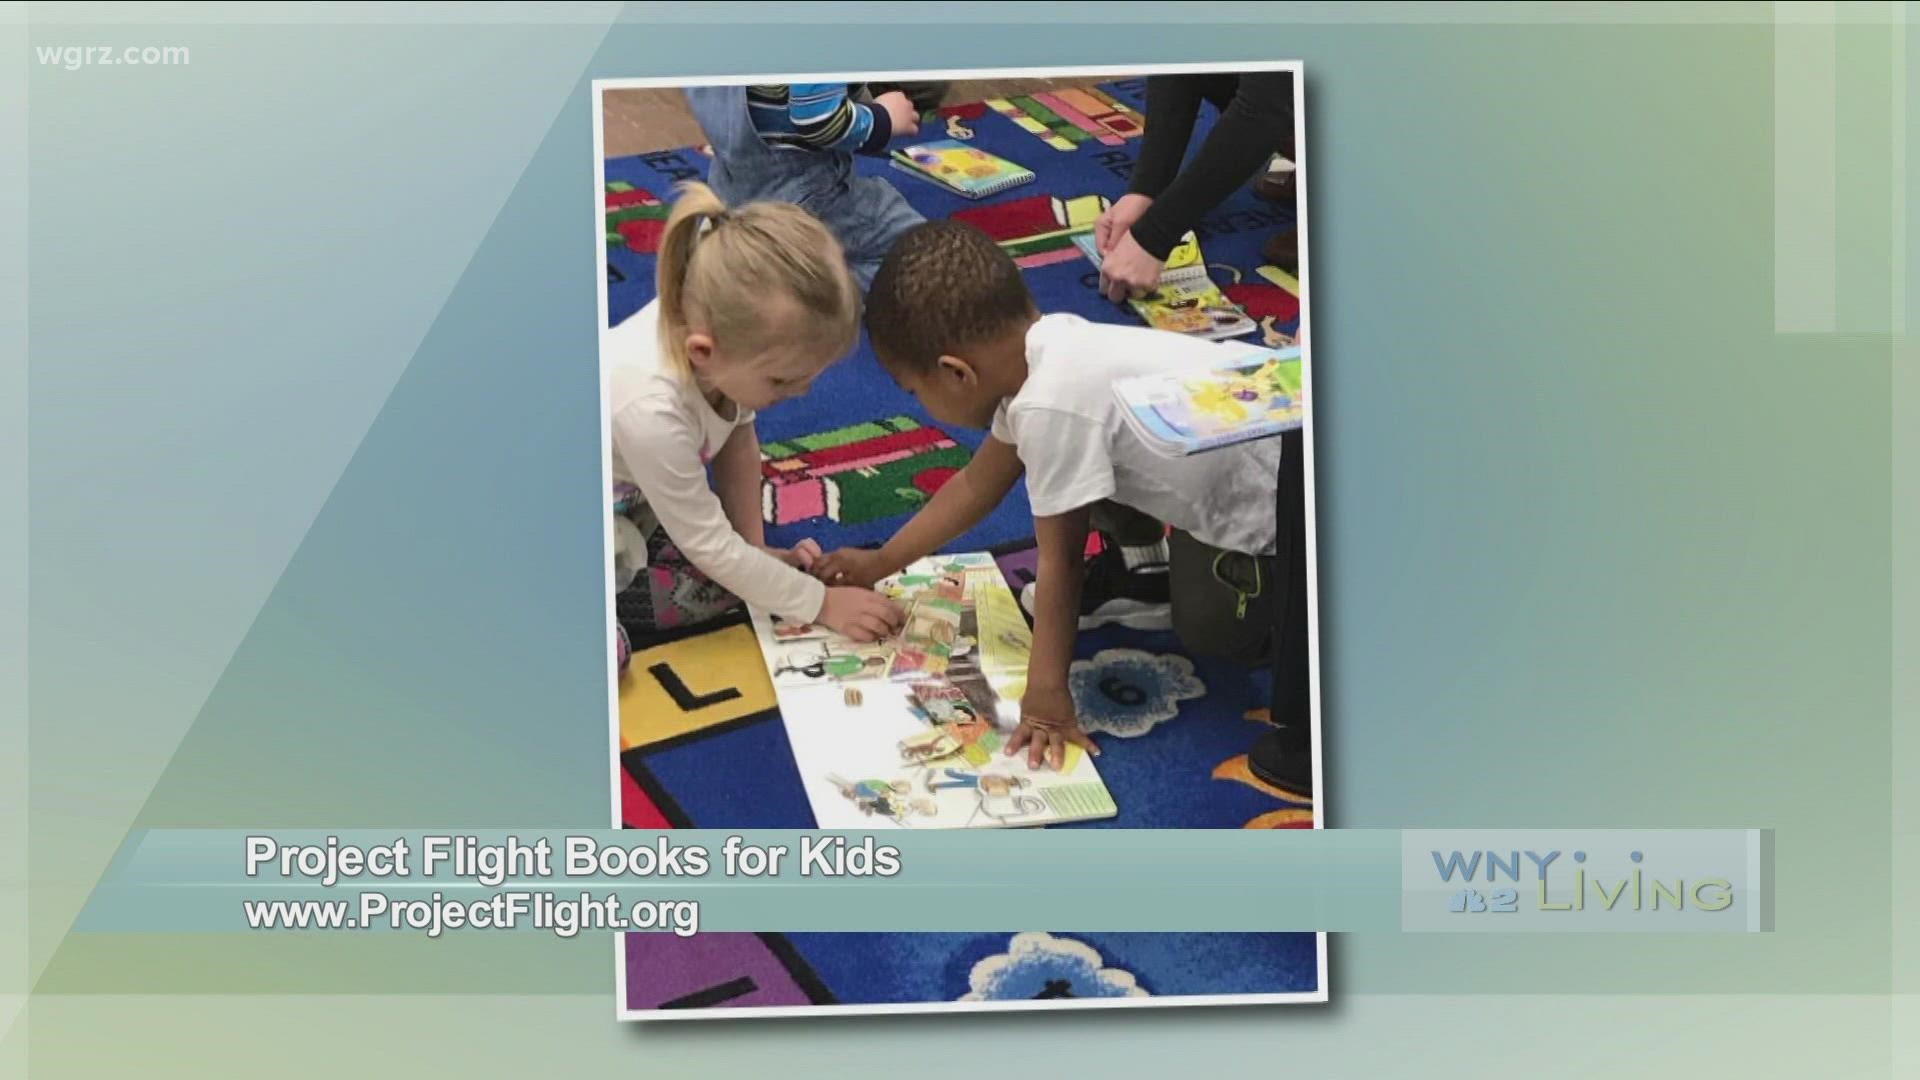 WNY Living - October 2 - Project Flight Books for Kids (THIS VIDEO IS SPONSORED BY PROJECT FLIGHT BOOKS FOR KIDS)